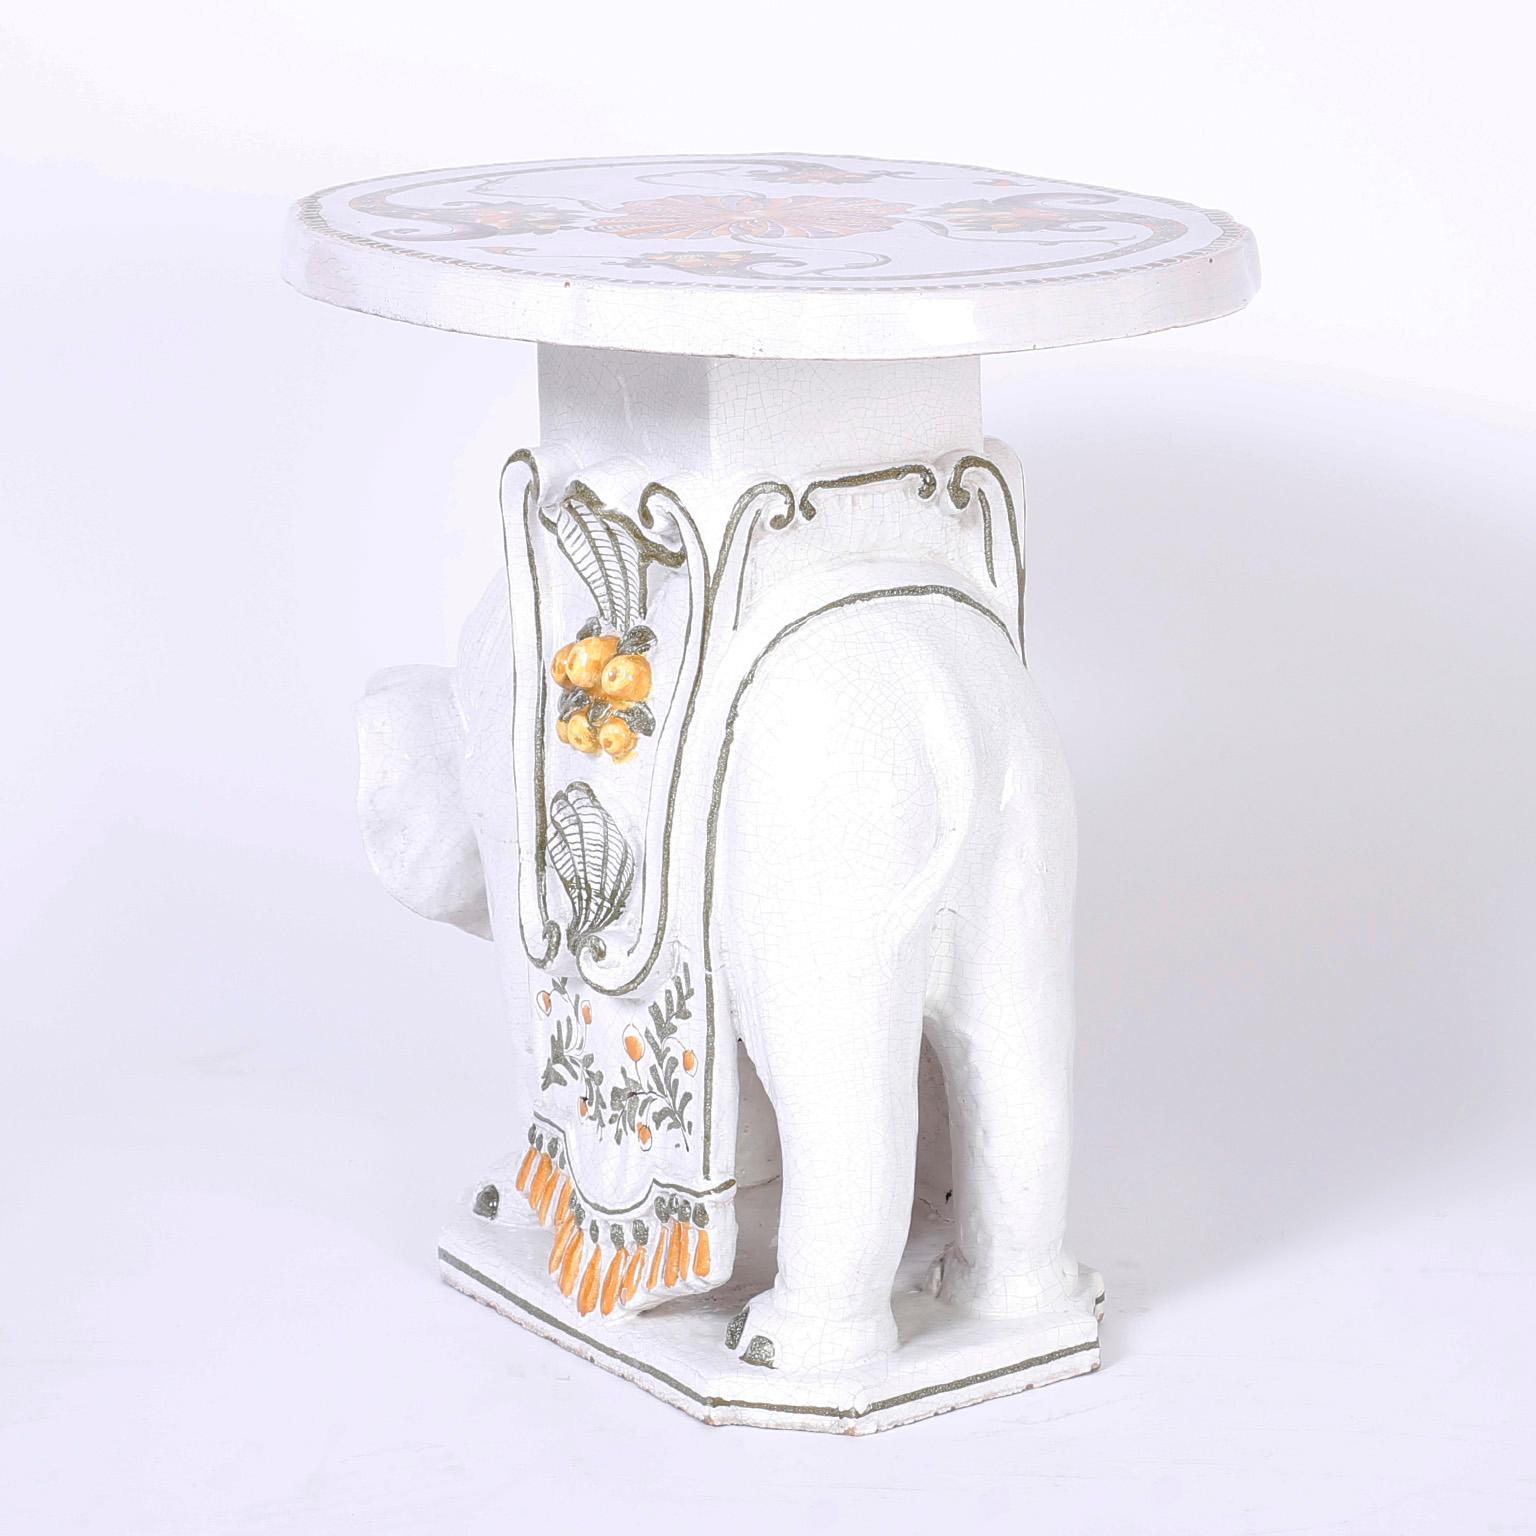 Pottery Italian Terra Cotta Elephant Drink Stand or Table